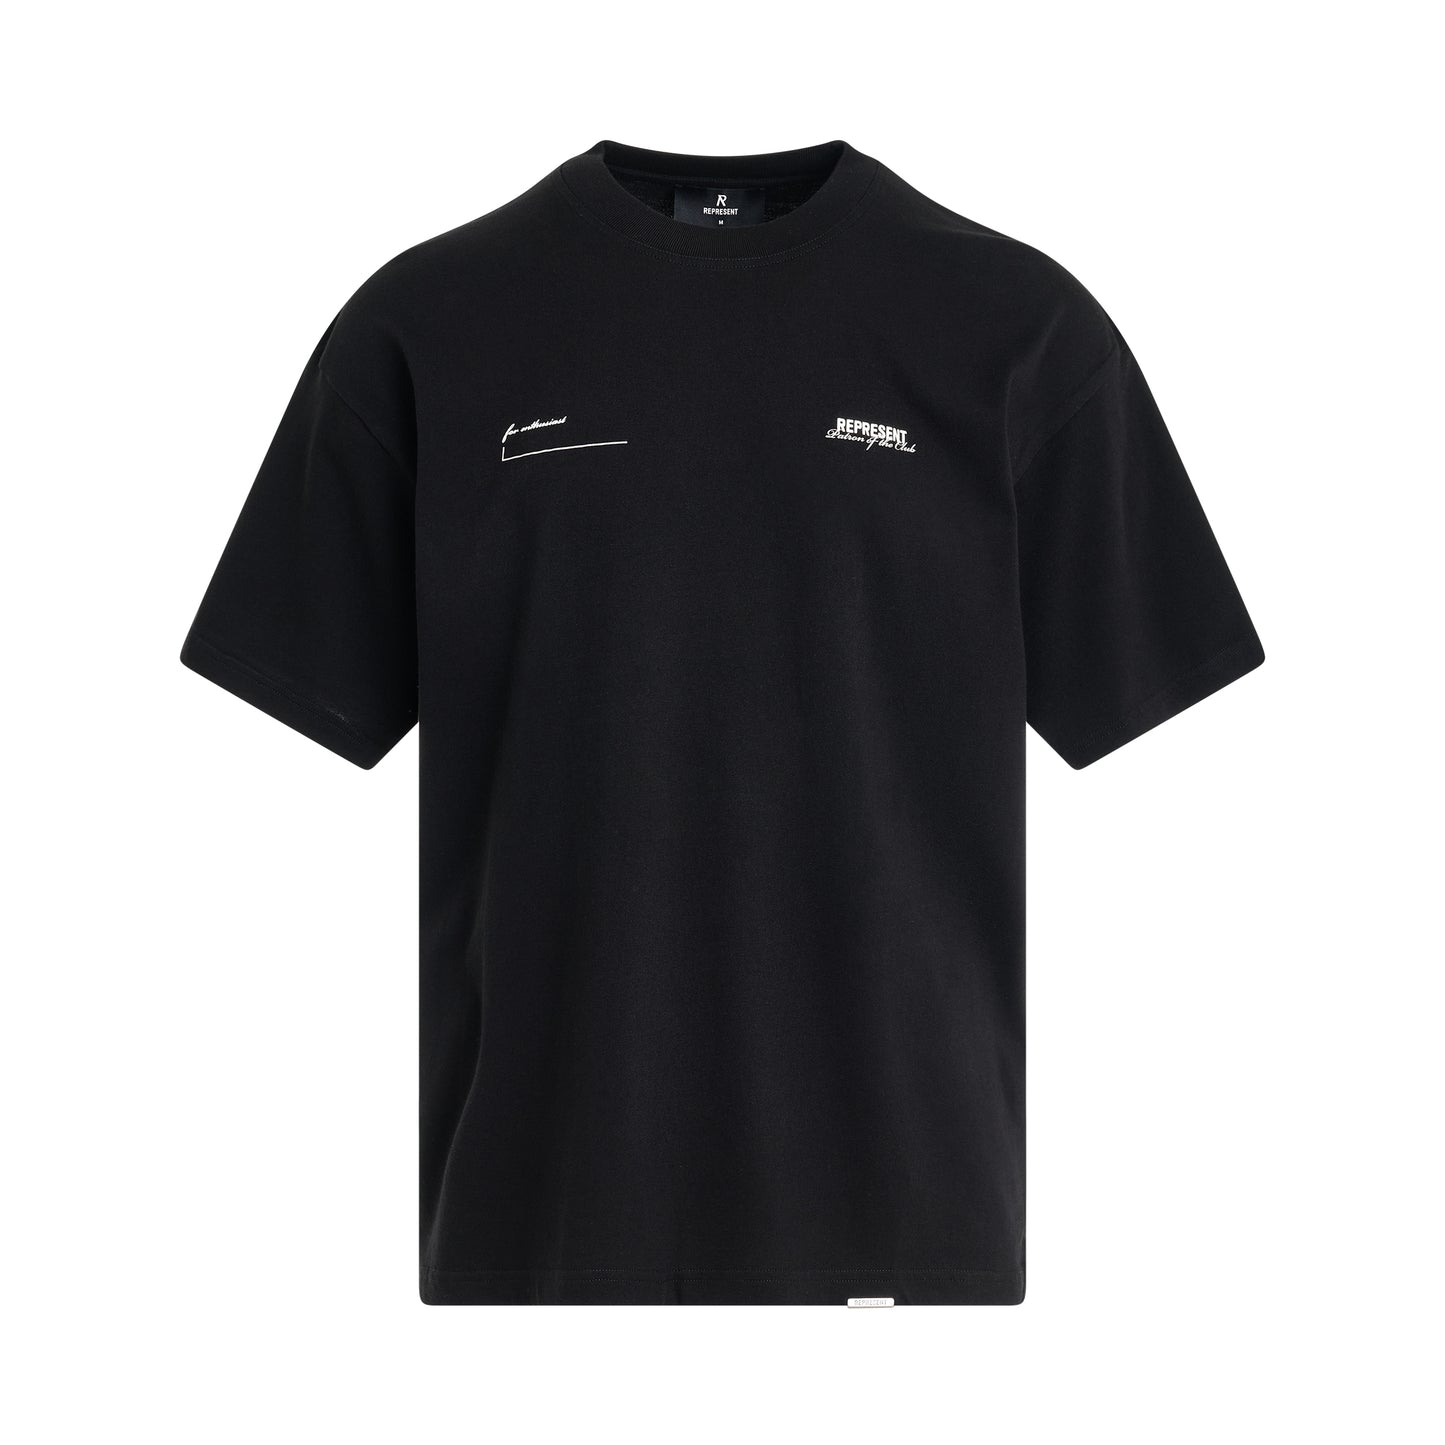 Patron of the Club T-Shirt in Black